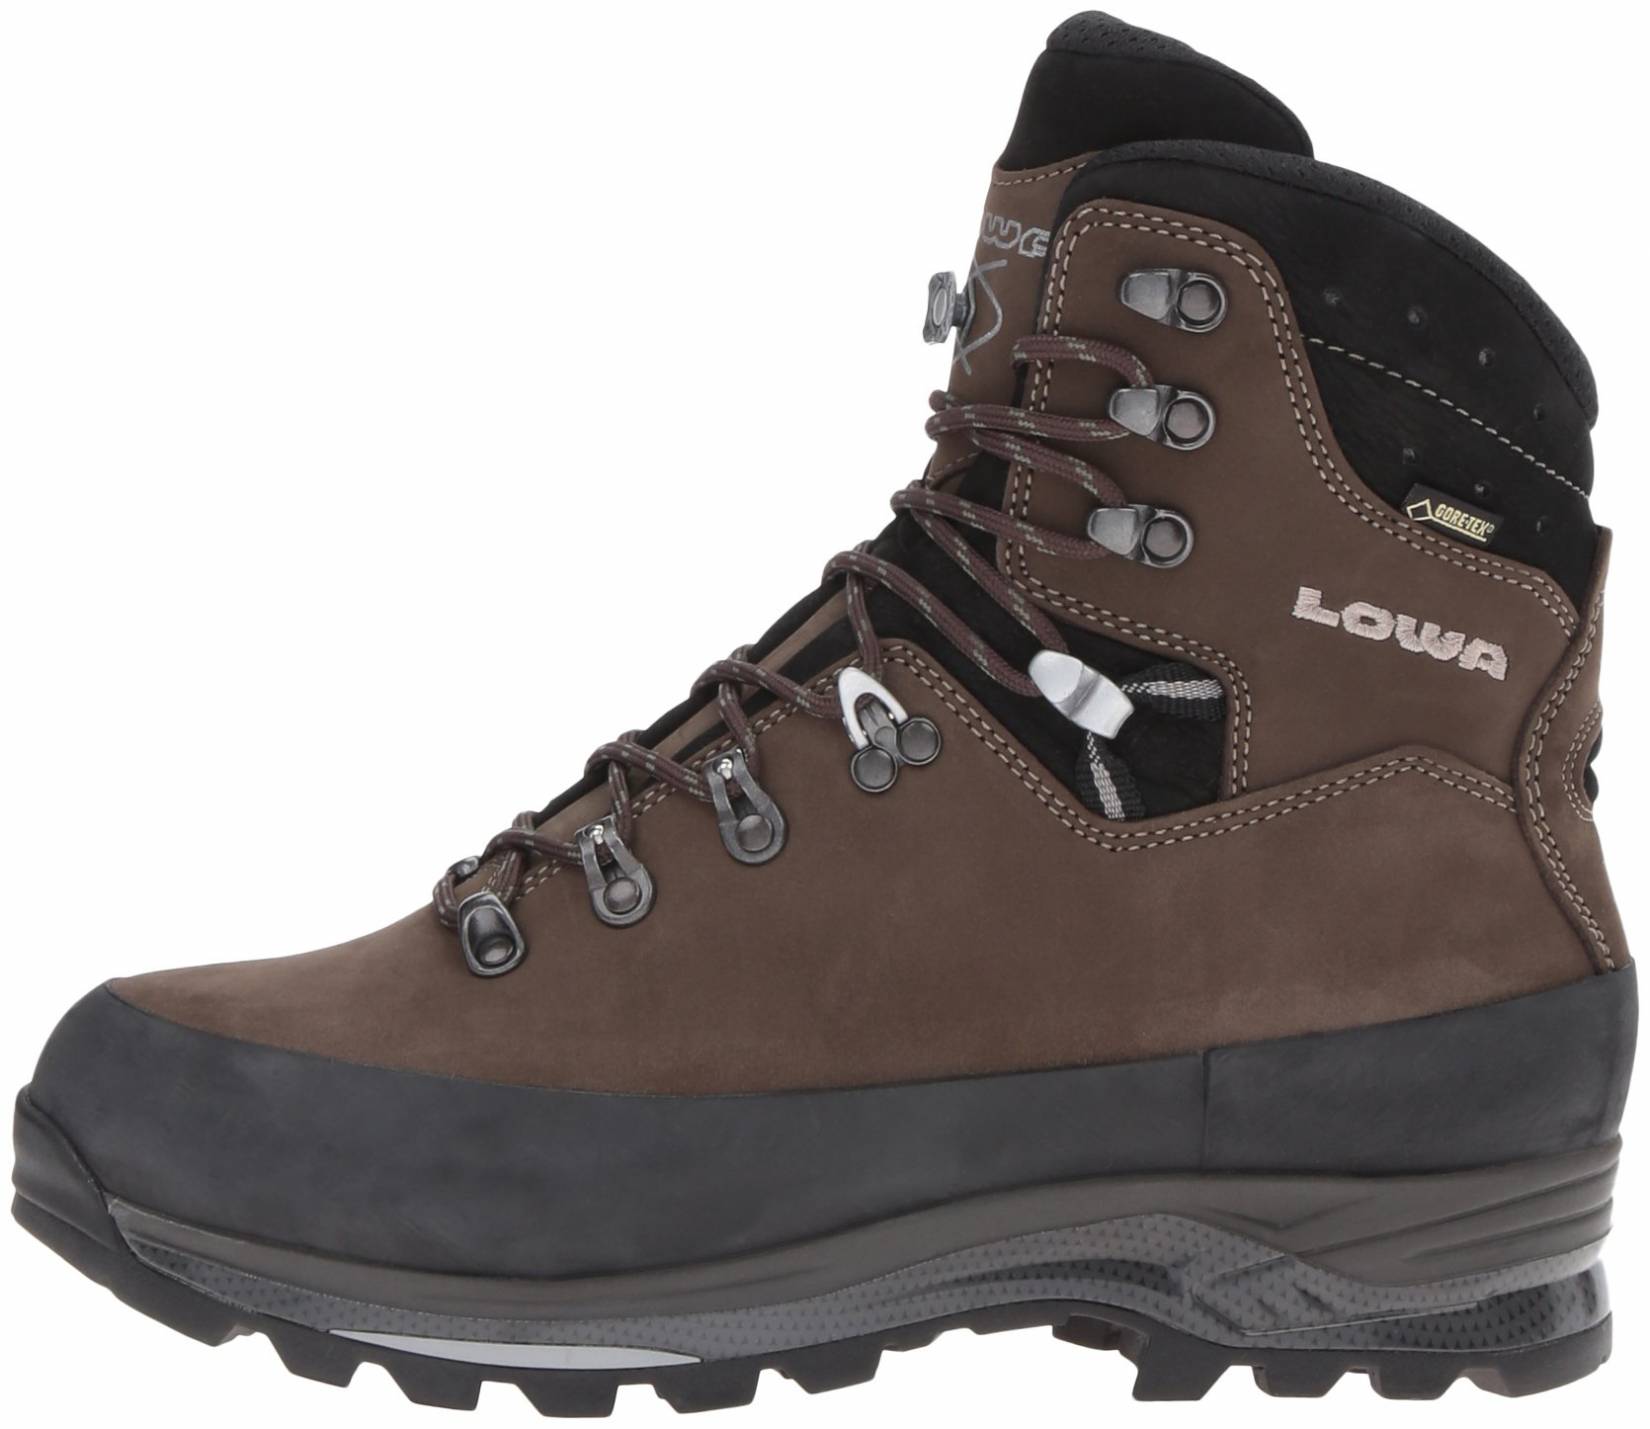 Only $299 + Review of Lowa Tibet GTX 